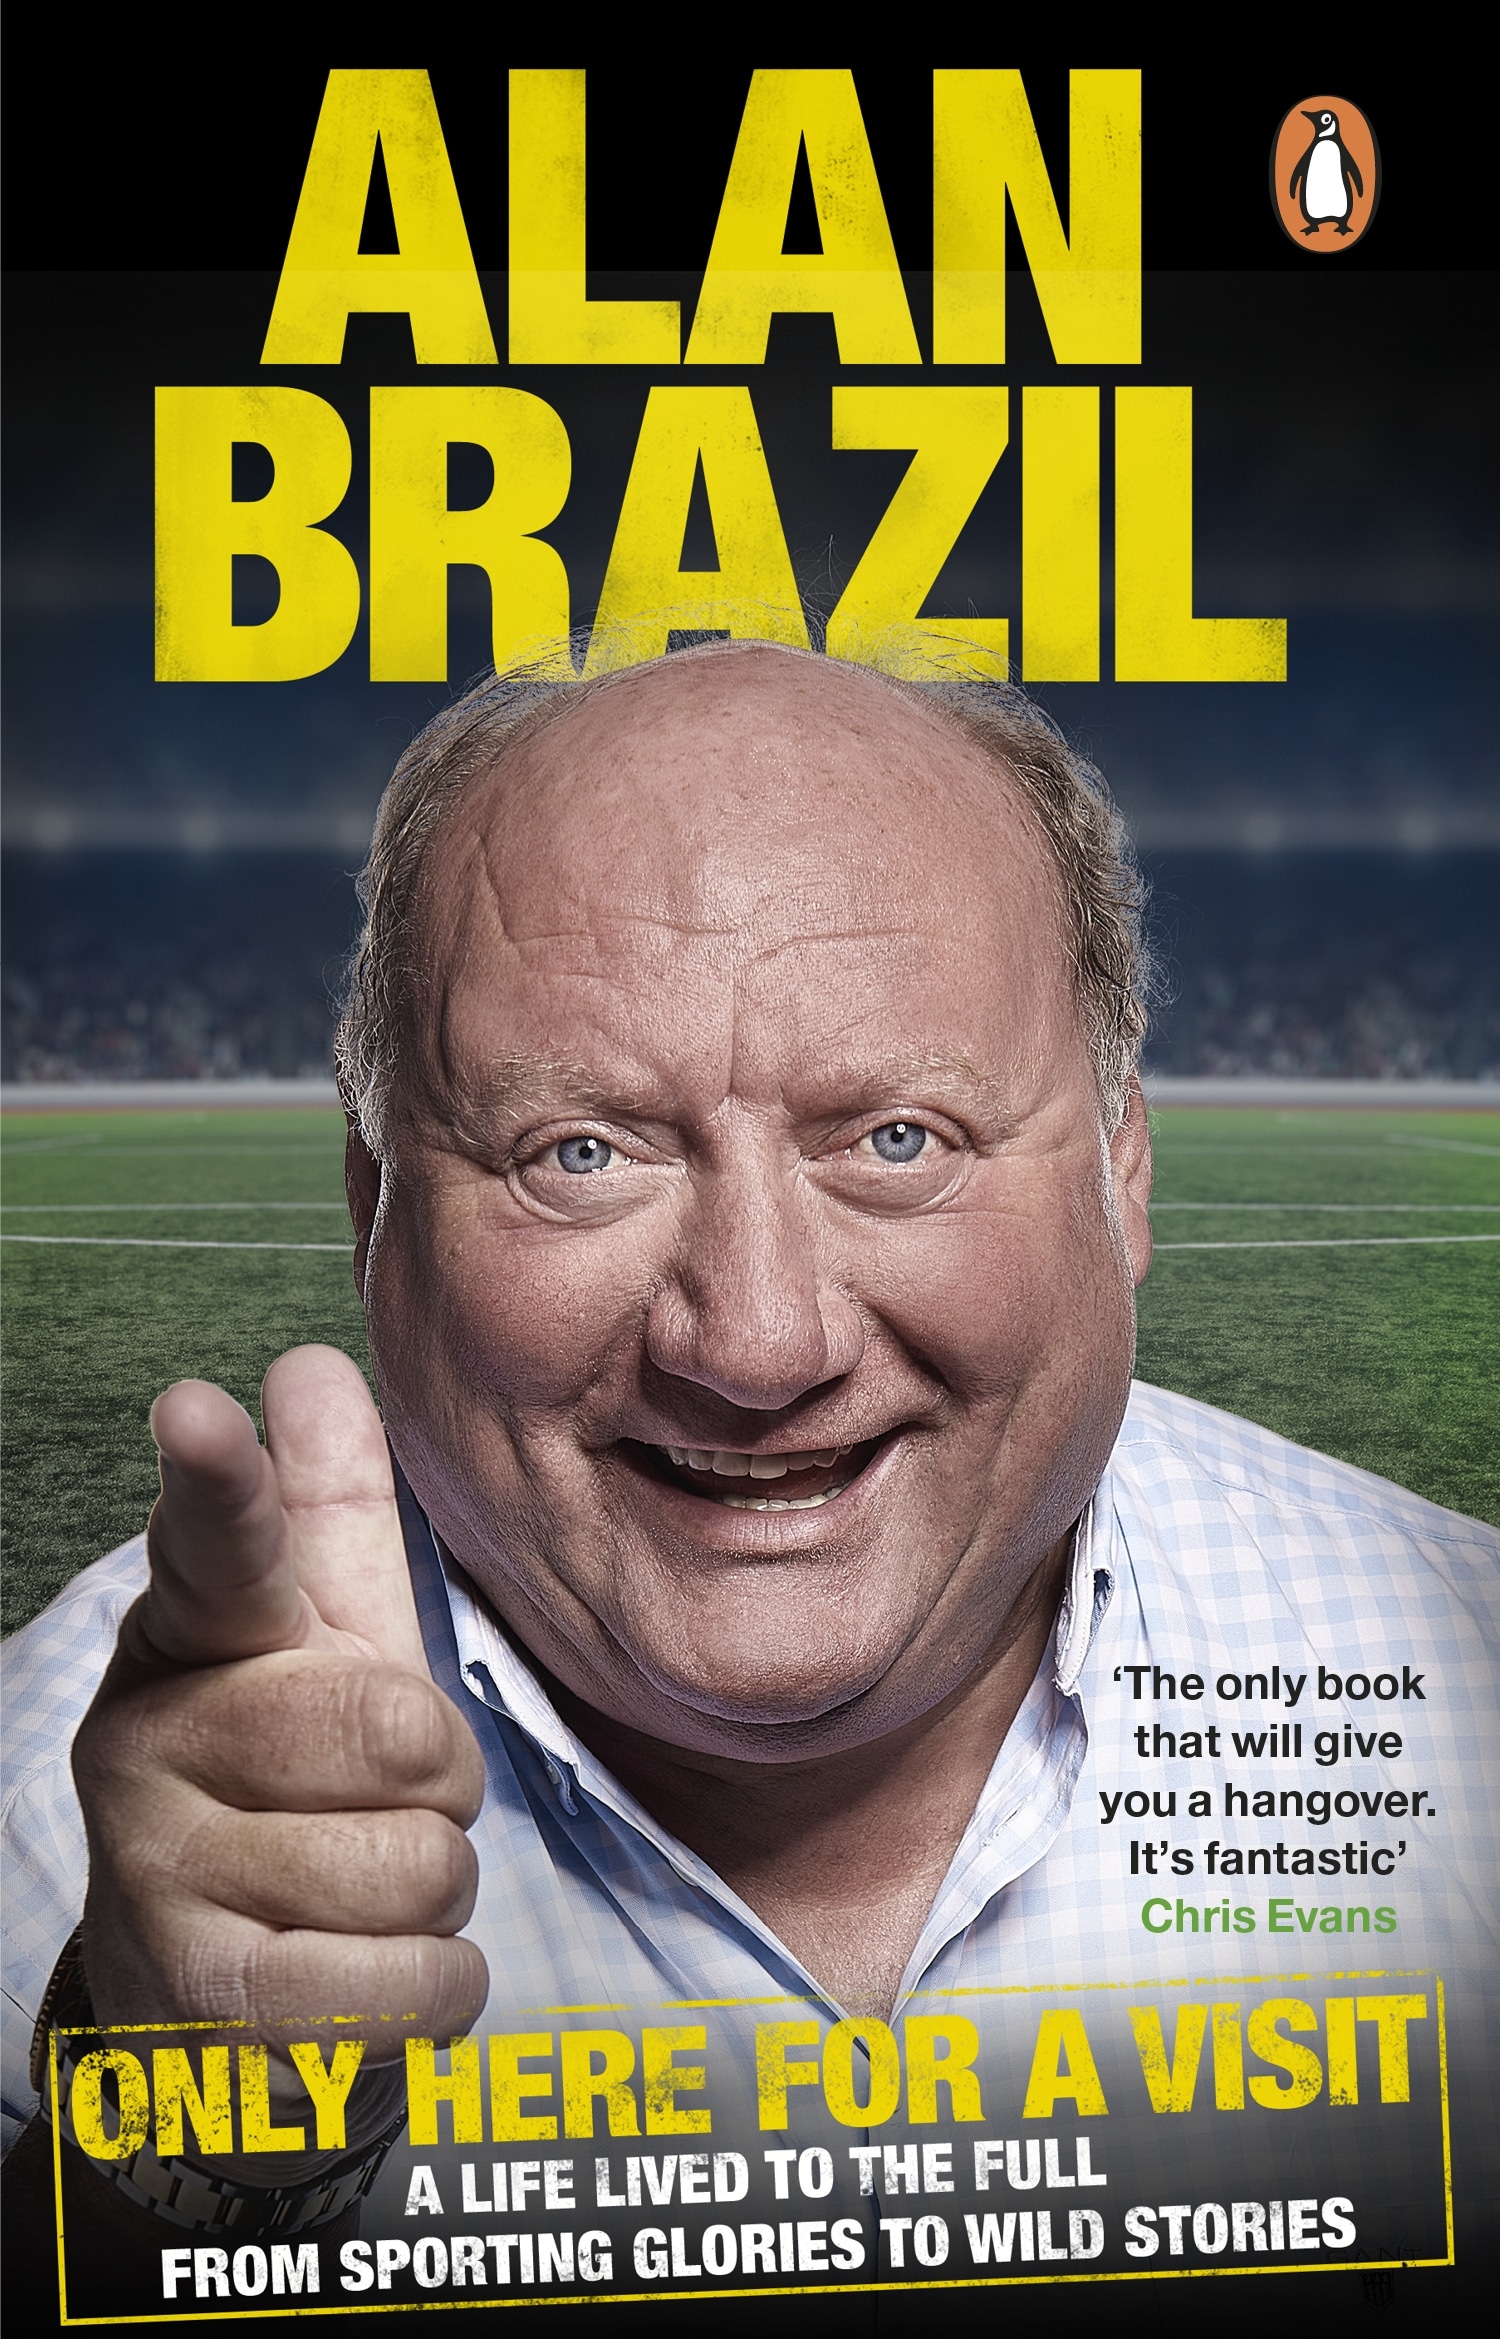 Book “Only Here For A Visit” by Alan Brazil — May 27, 2021